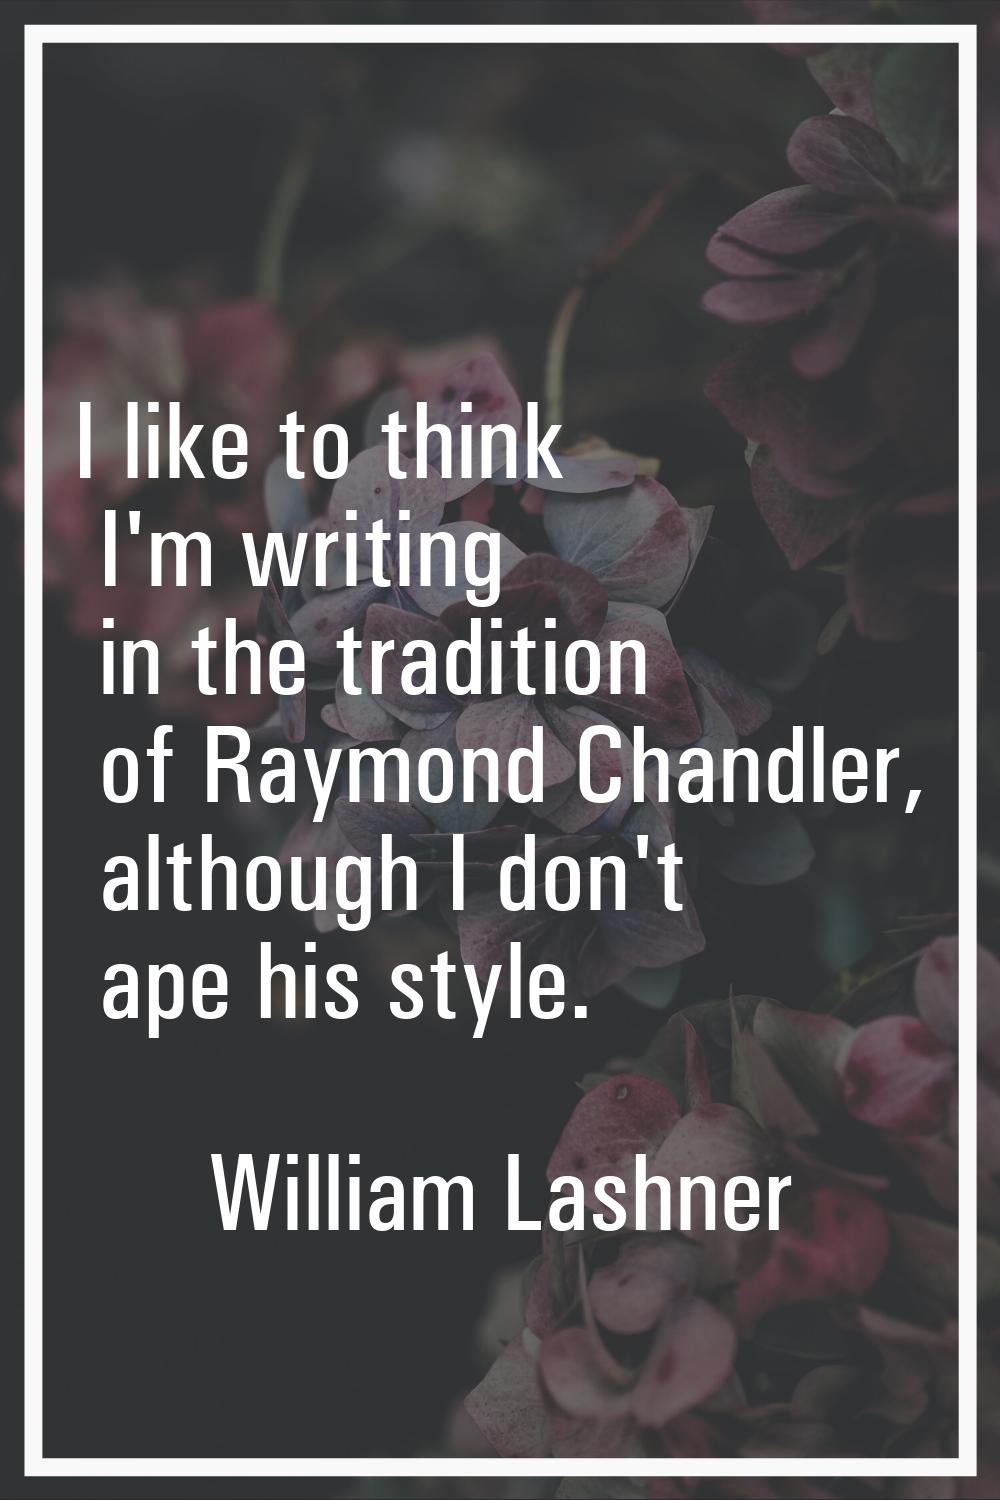 I like to think I'm writing in the tradition of Raymond Chandler, although I don't ape his style.